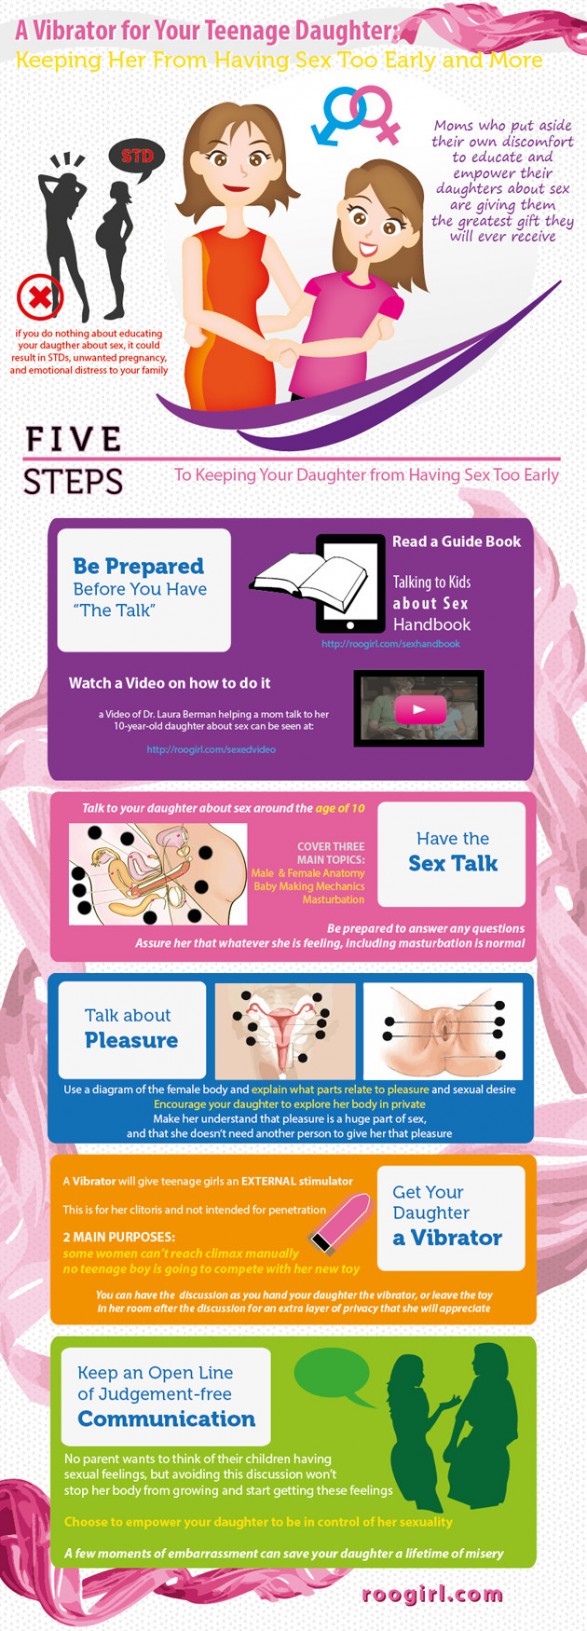 Would You Buy a Vibrator for Your Teenage Daughter Infographic